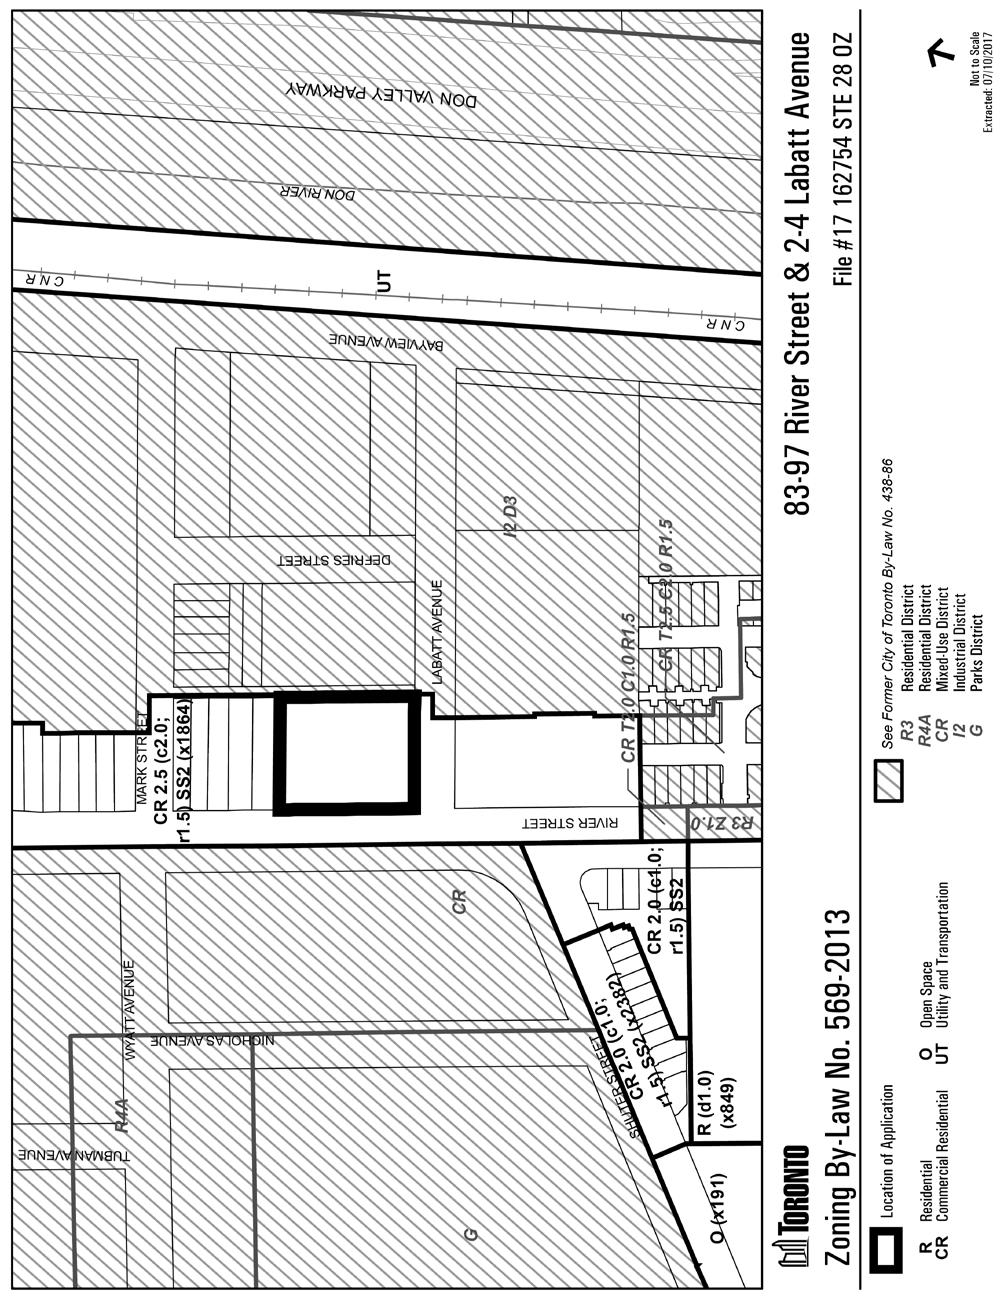 Attachment 6: Zoning Staff report for action